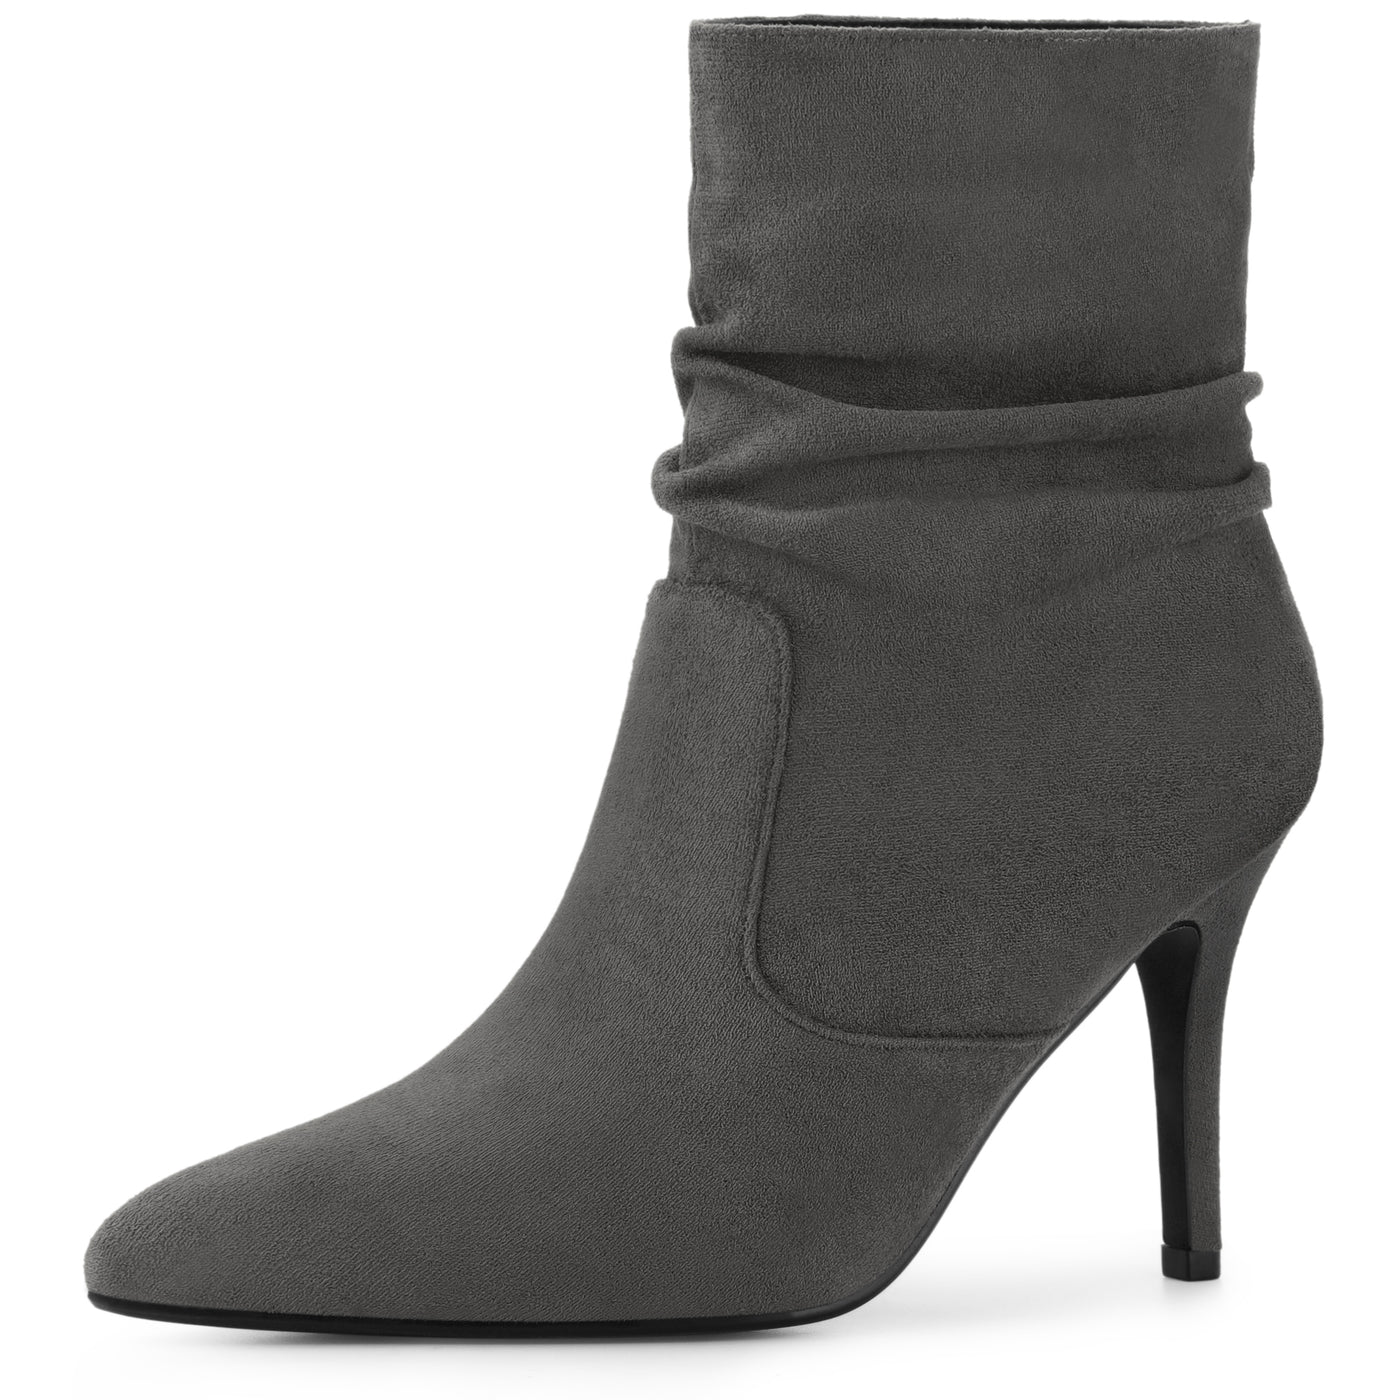 Allegra K Slouchy Pointy Toe Pull On Stiletto Heel Ankle Boots